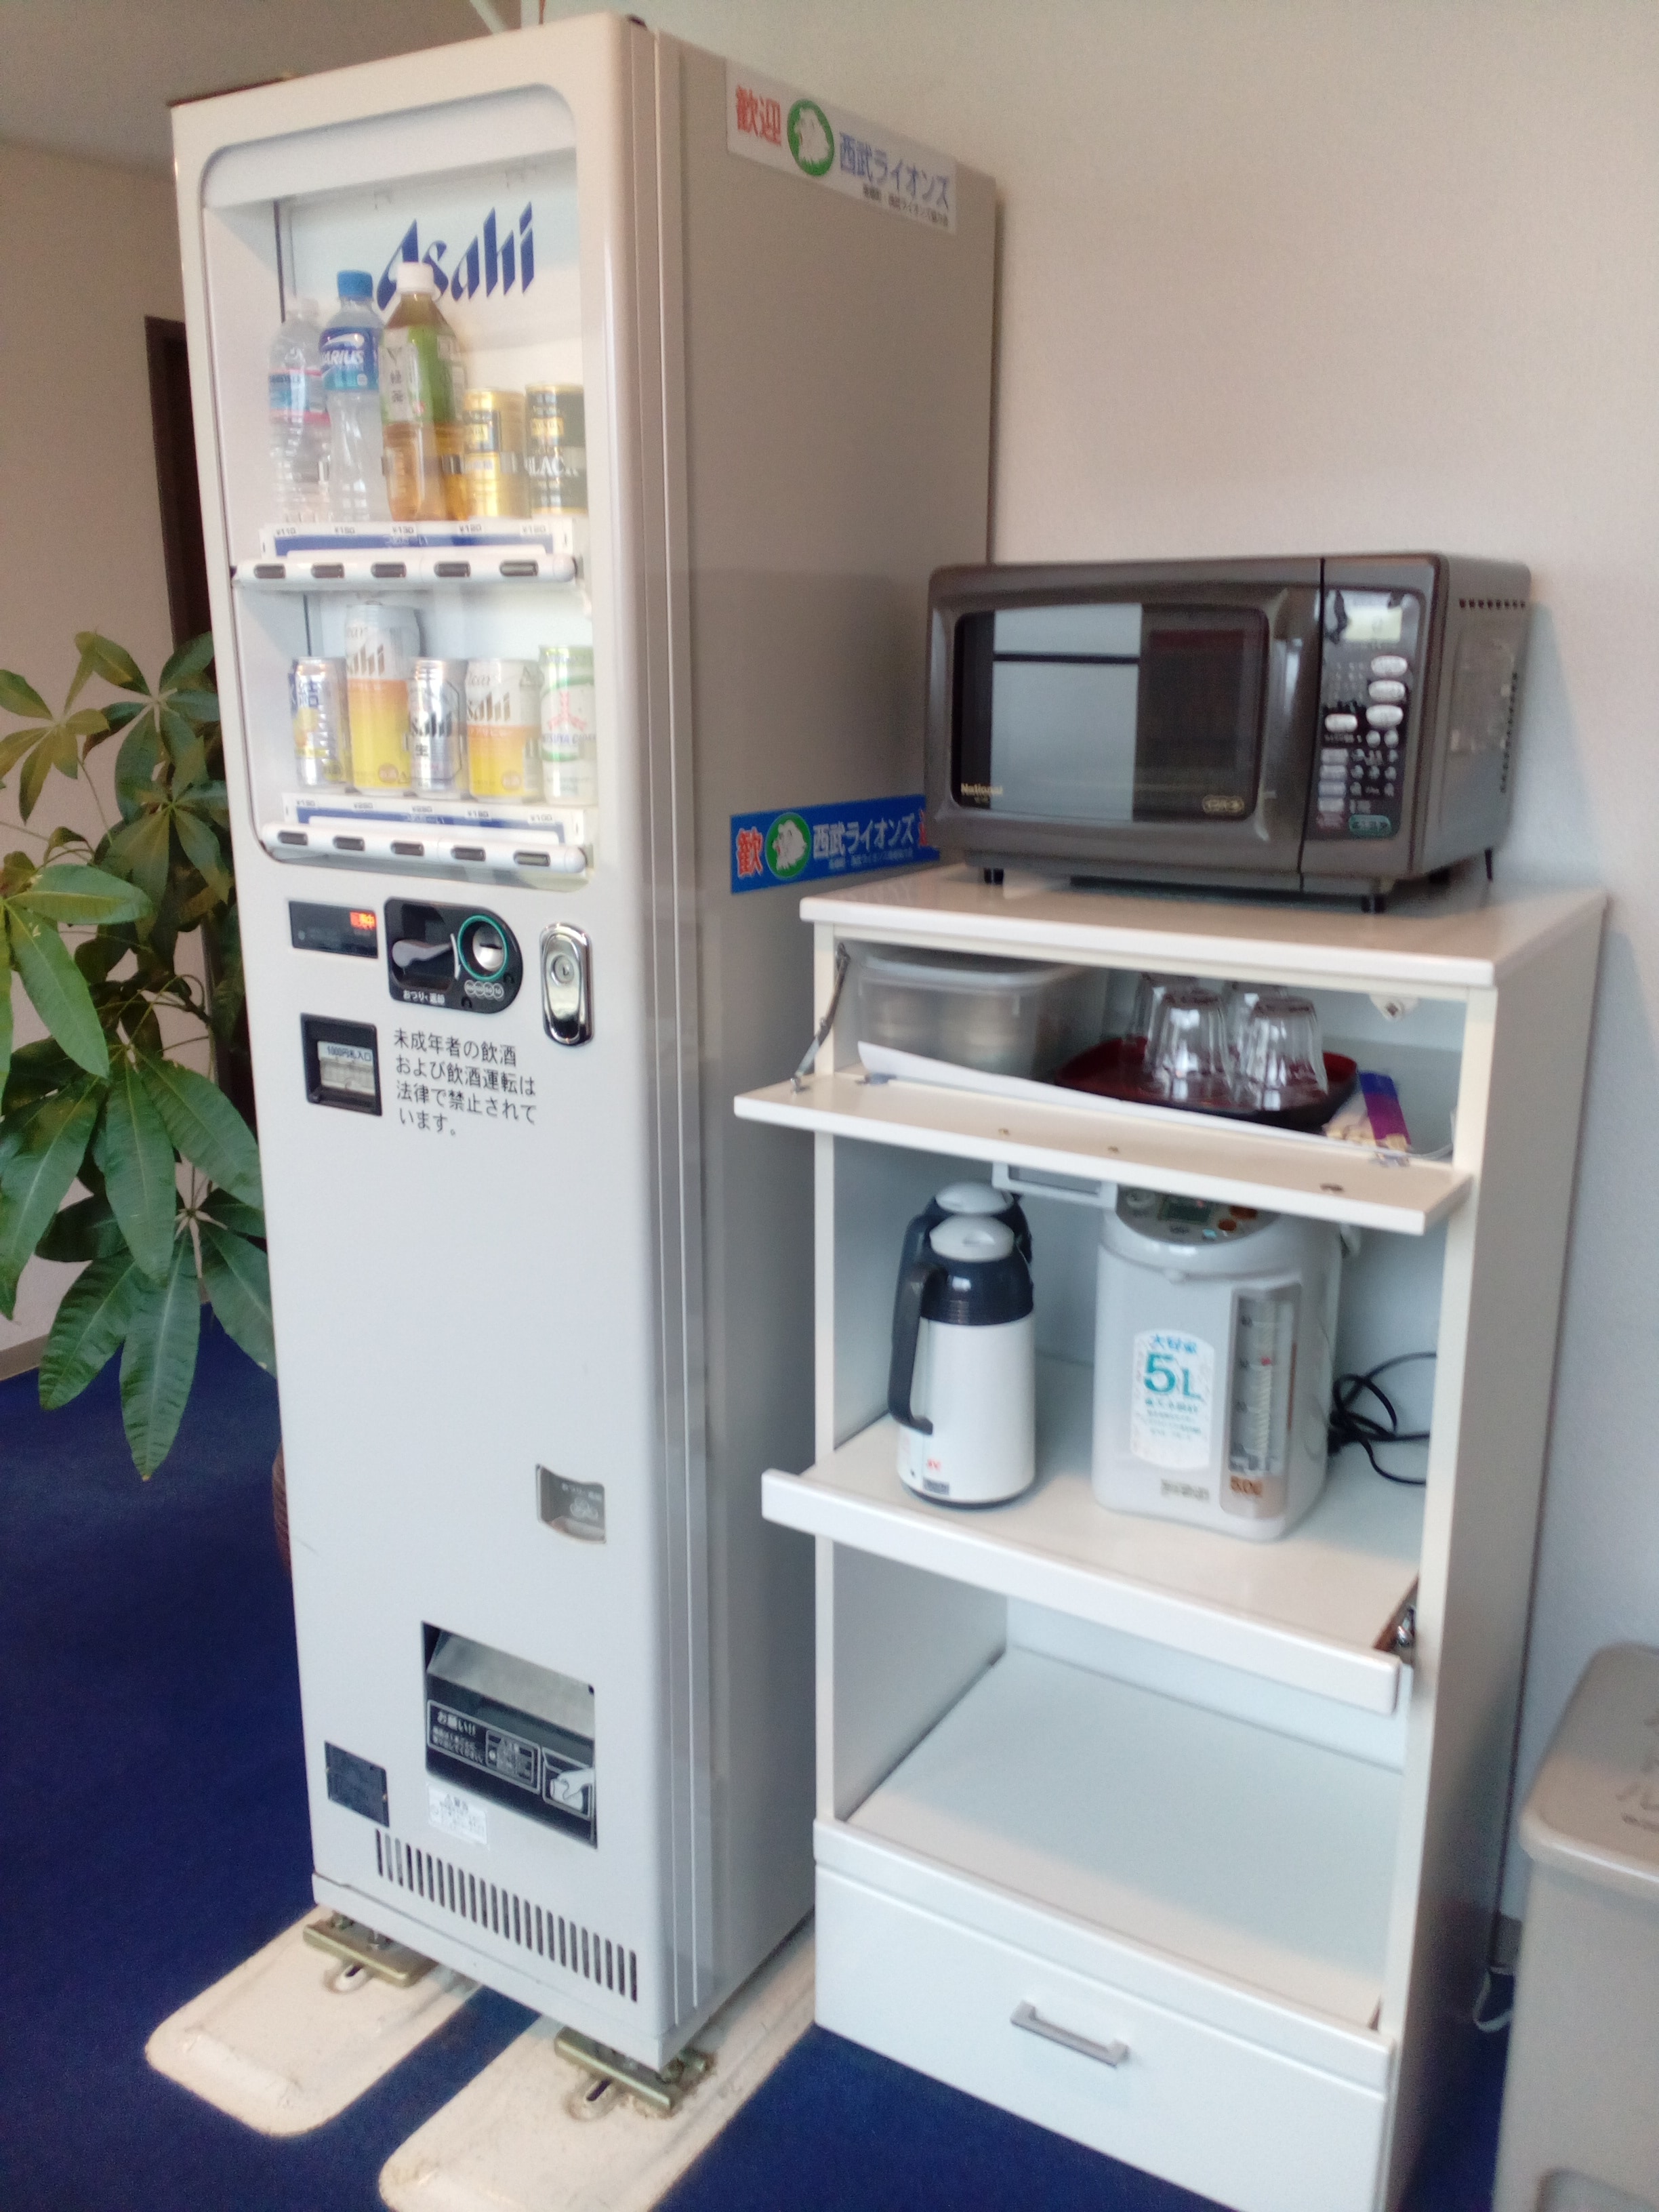 Vending machine and microwave oven corner